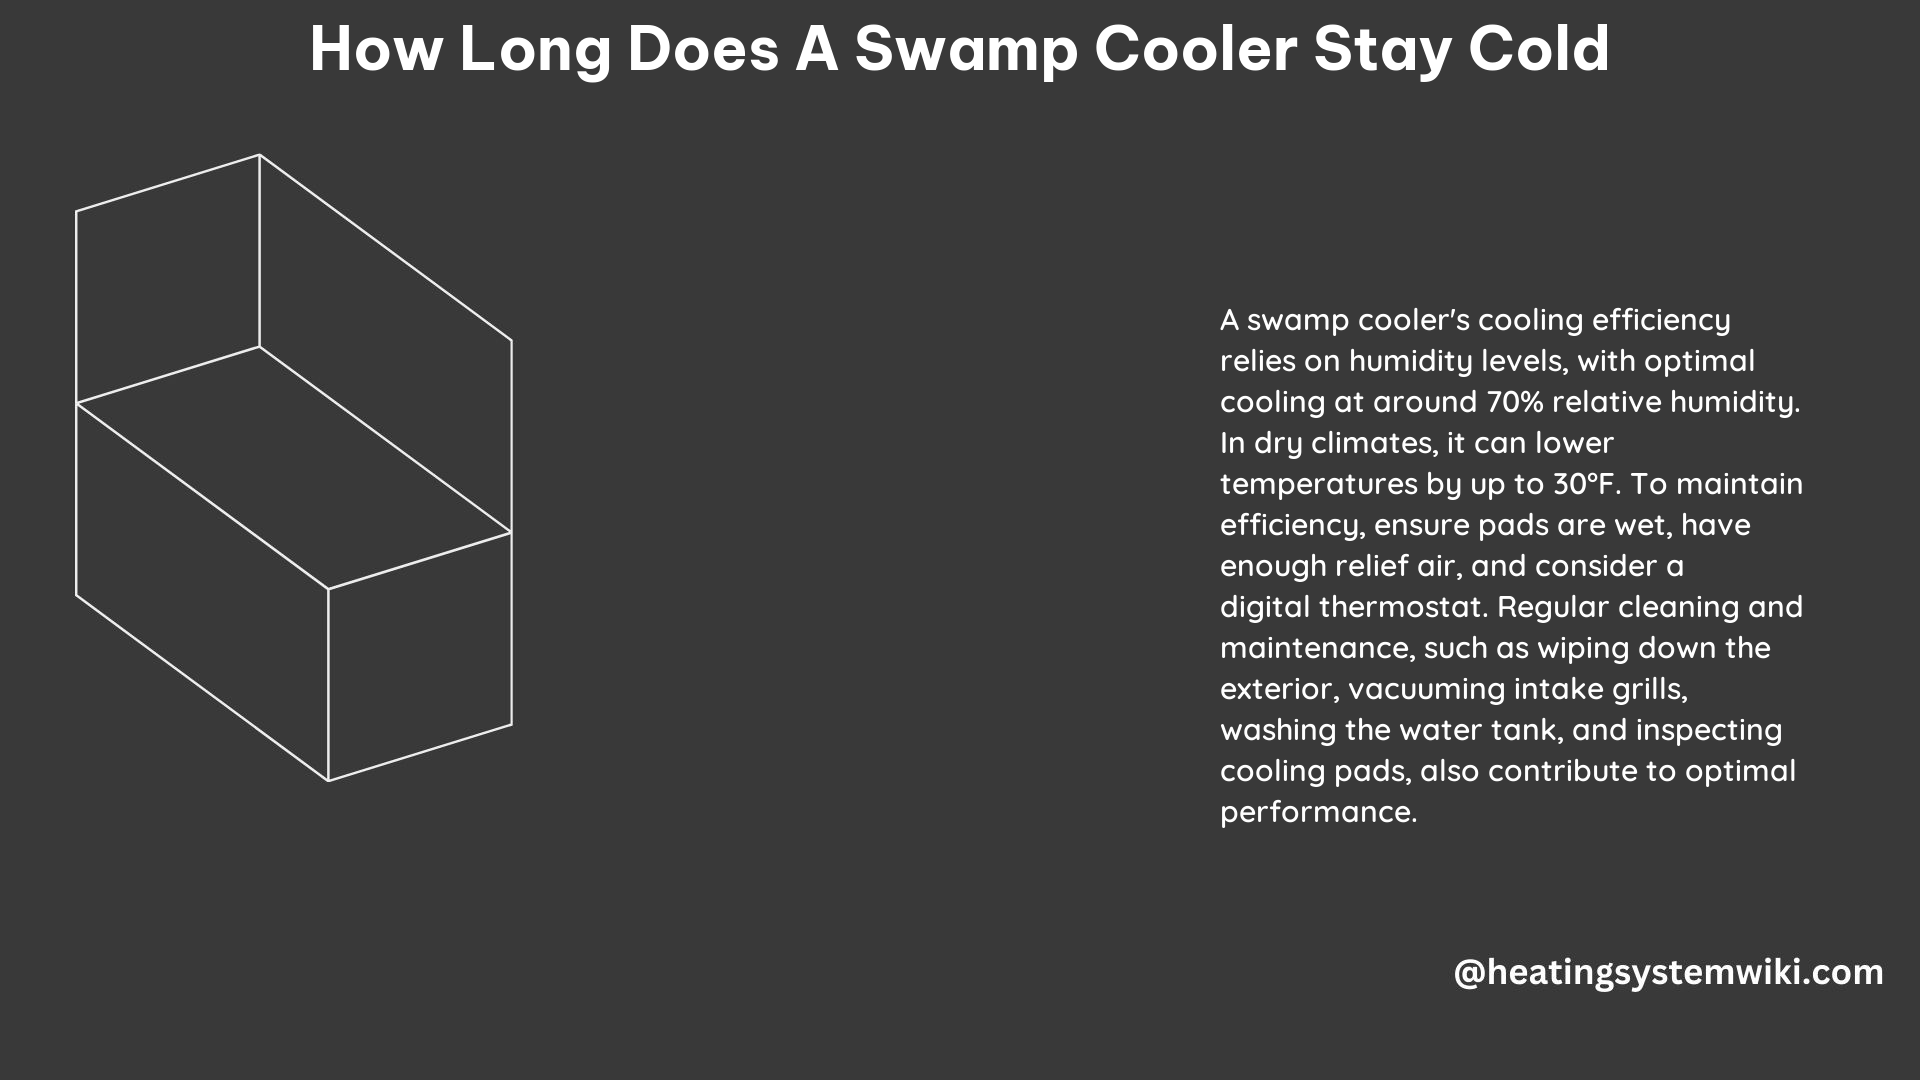 How Long Does a Swamp Cooler Stay Cold